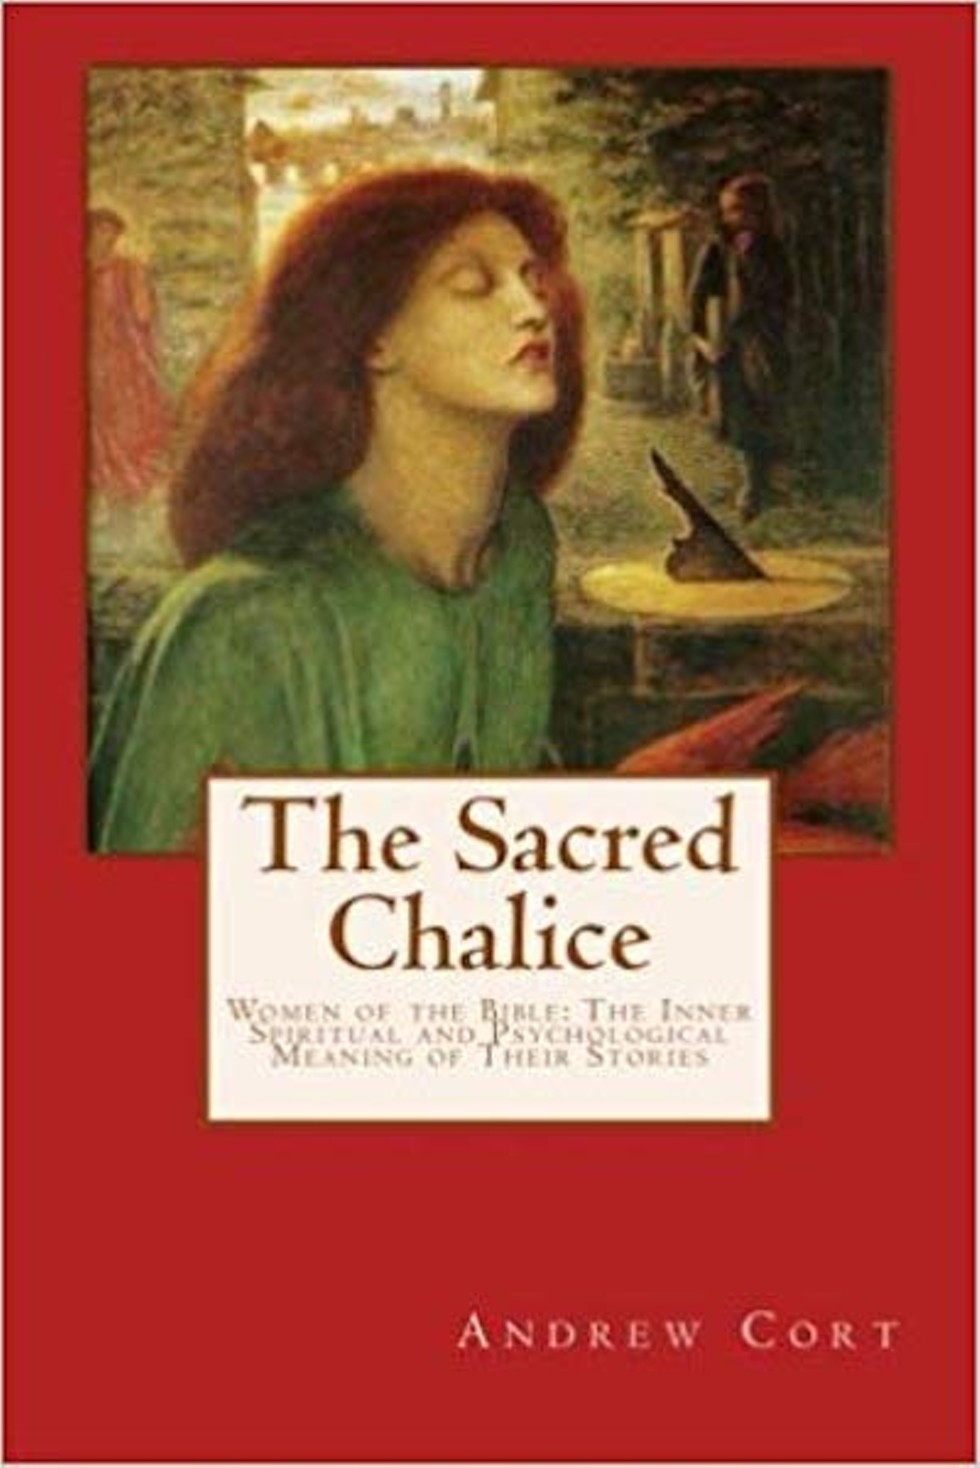 Based on the Book "The Sacred Chalice"